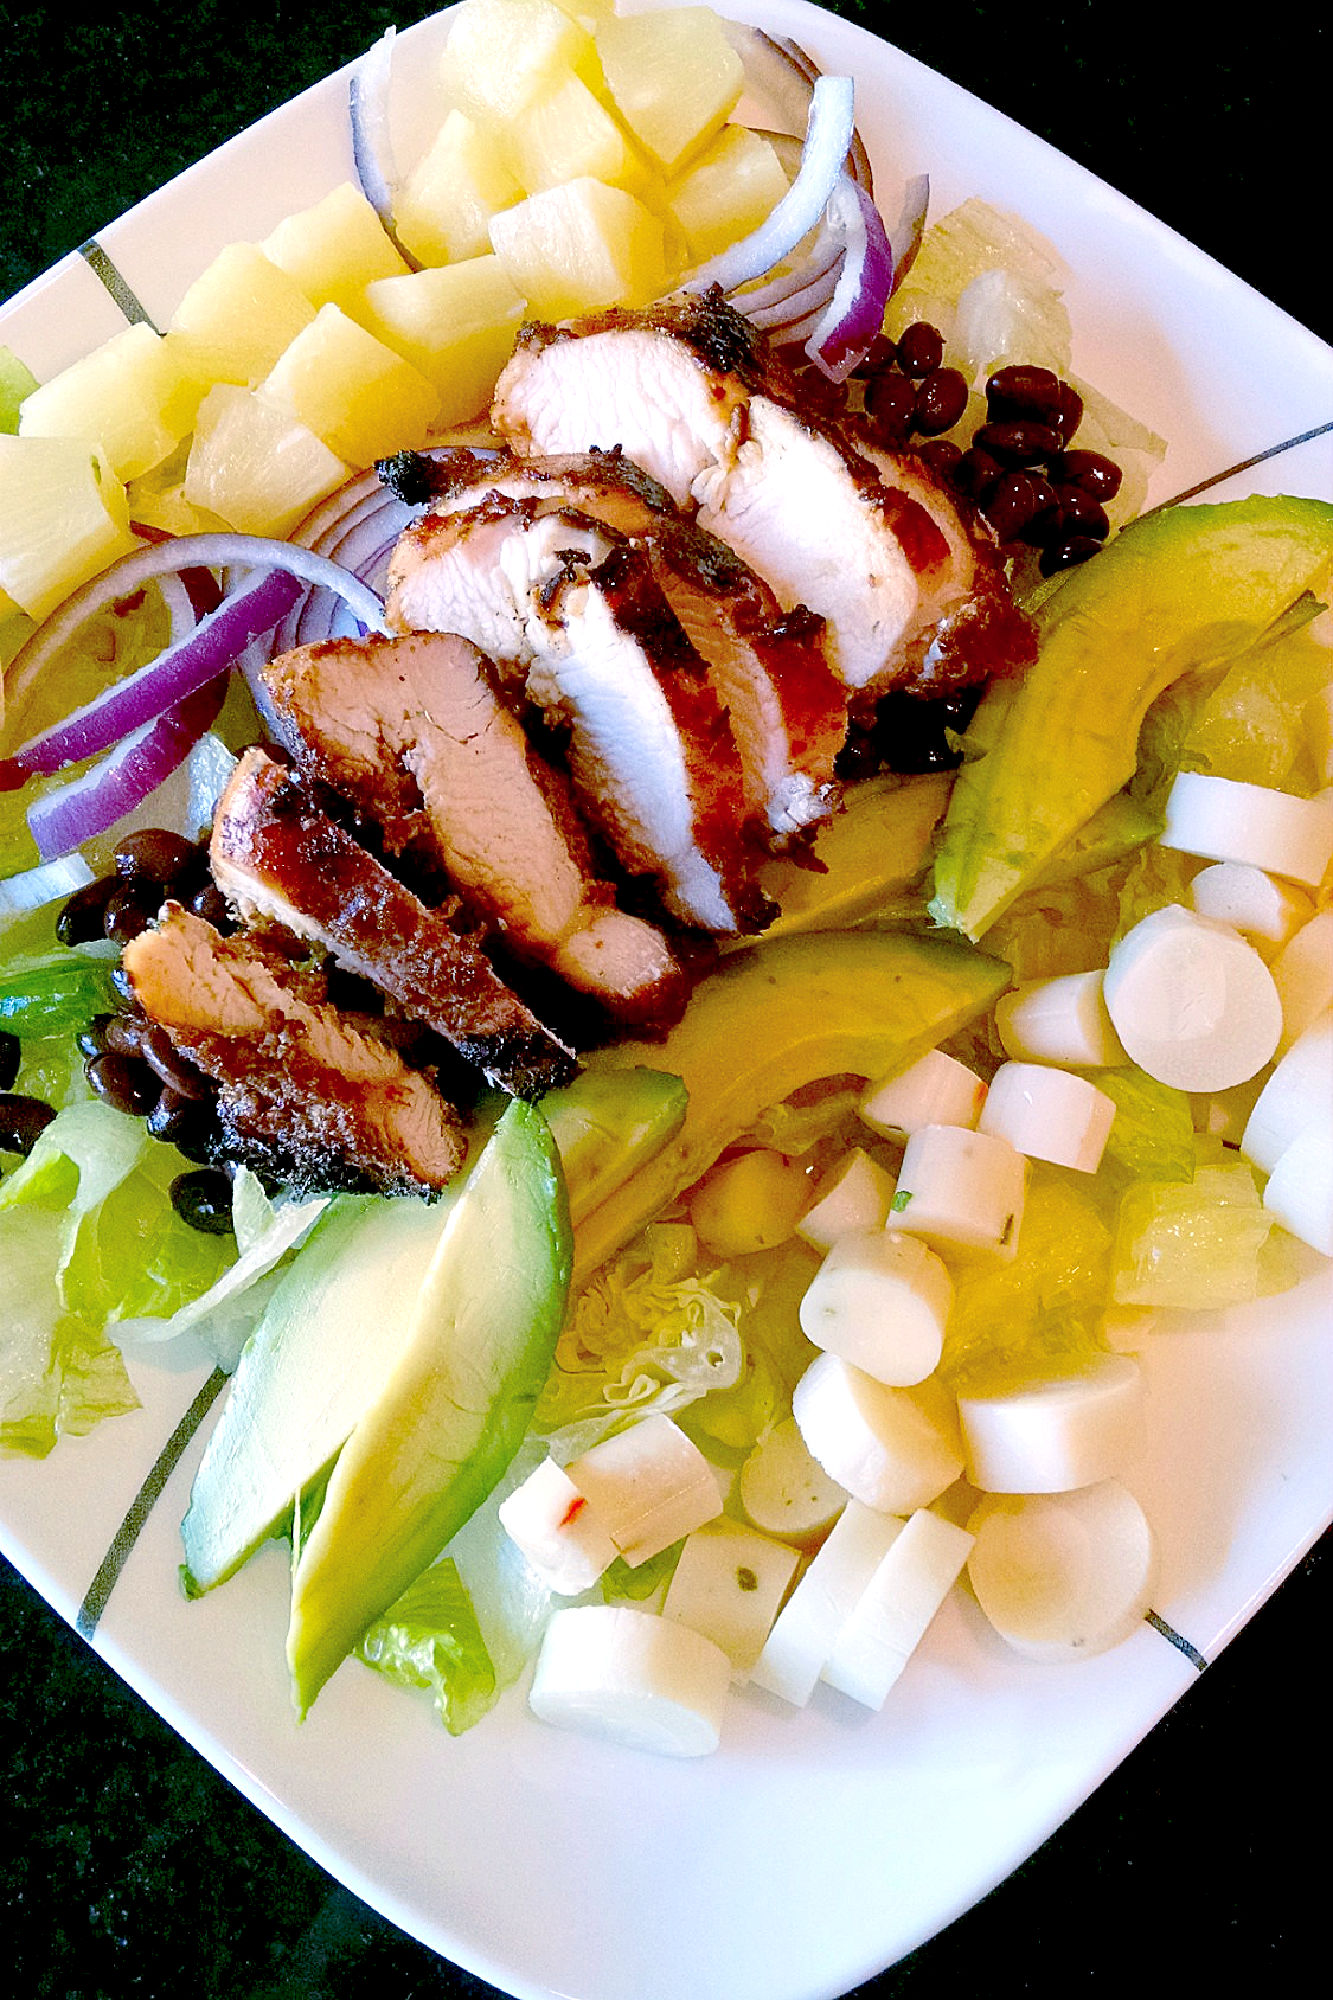 A delicious Caribbean twist to the cobb salad, this Calypso Caribbean Cobb Salad has hearts of palm, pineapple, and jerk marinated chicken that transports you to the islands.